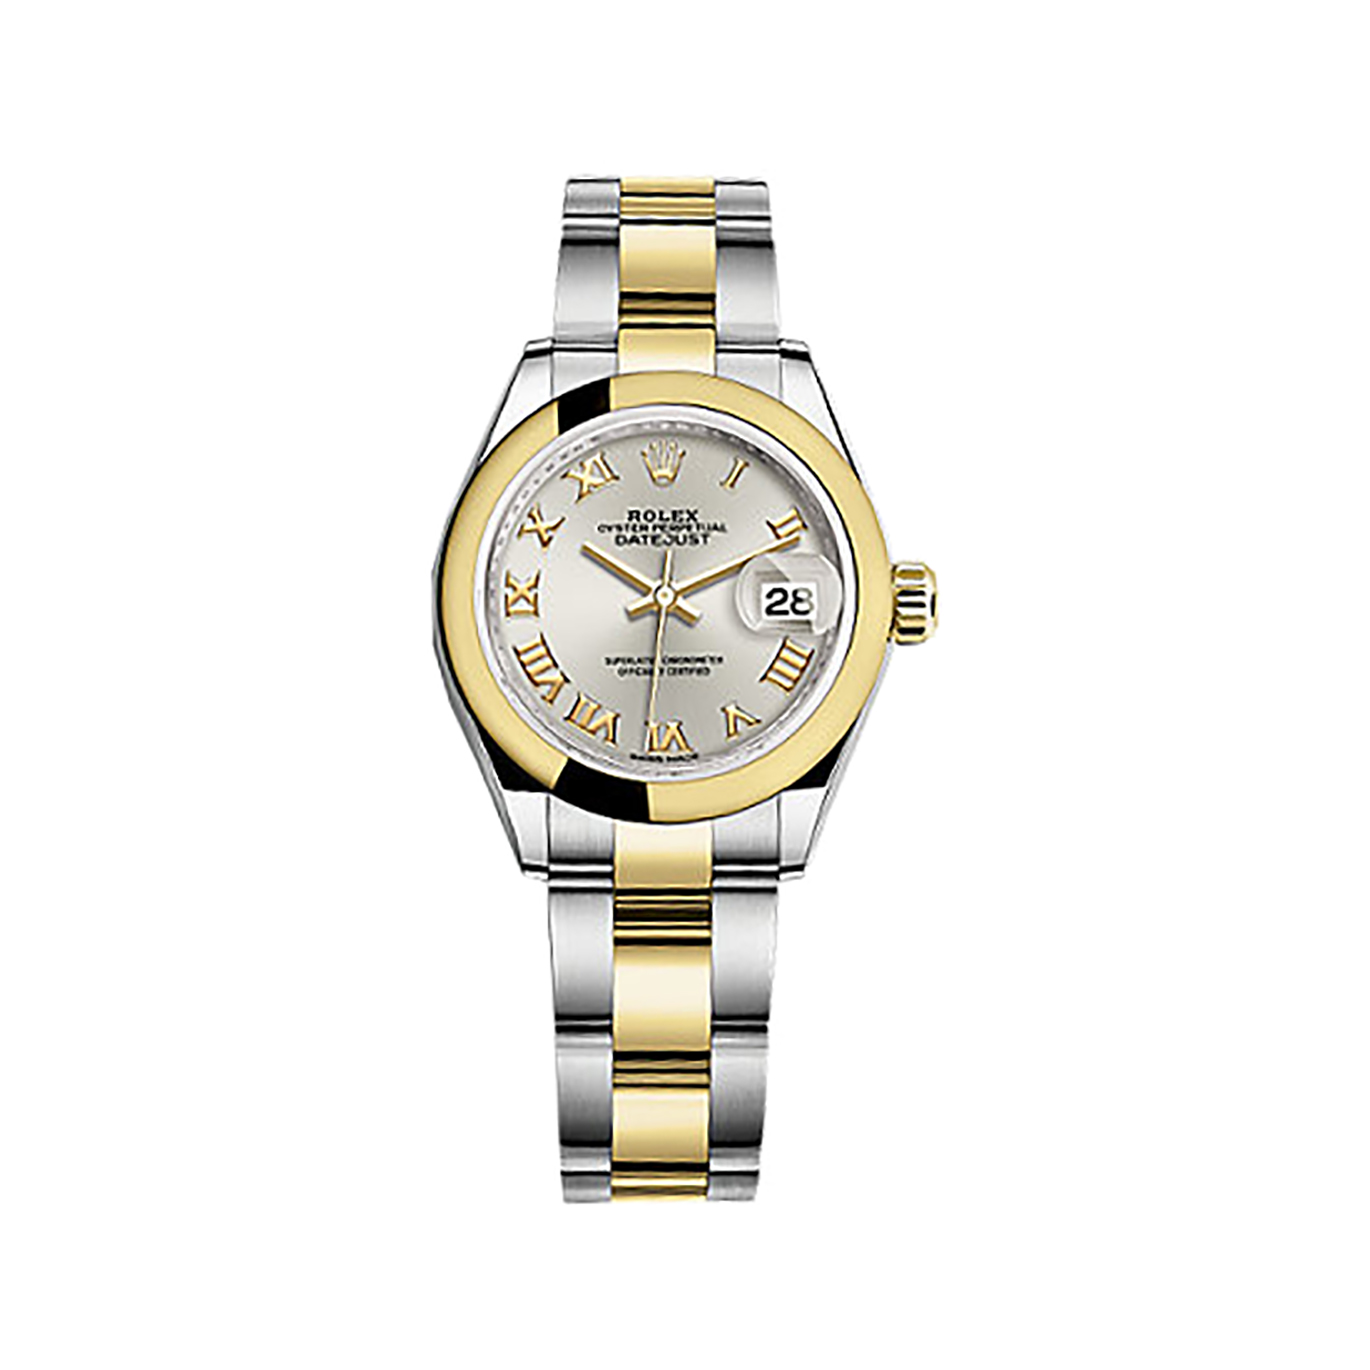 Lady-Datejust 28 279163 Gold & Stainless Steel Watch (Silver)